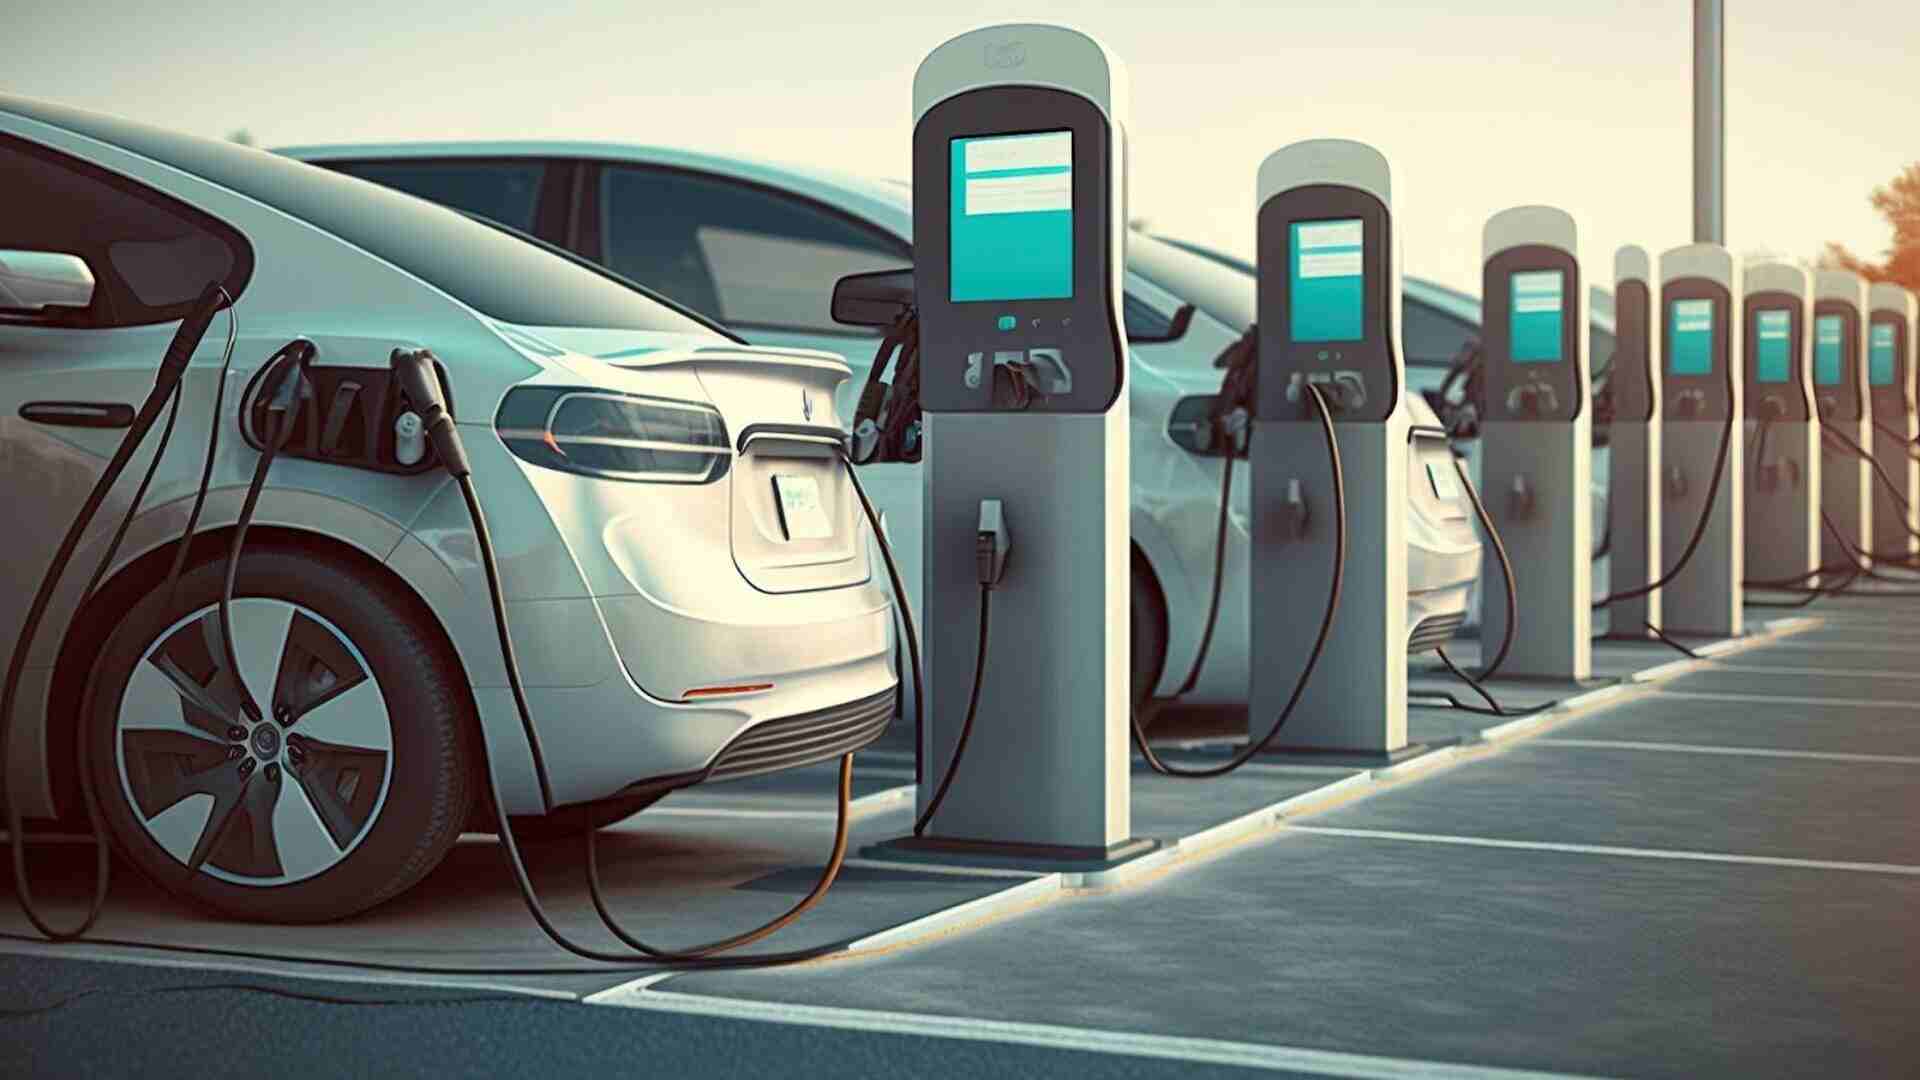 Indian-Origin Researcher Discovers Tech Capable Of Charging An Electric Car In 10 Minutes